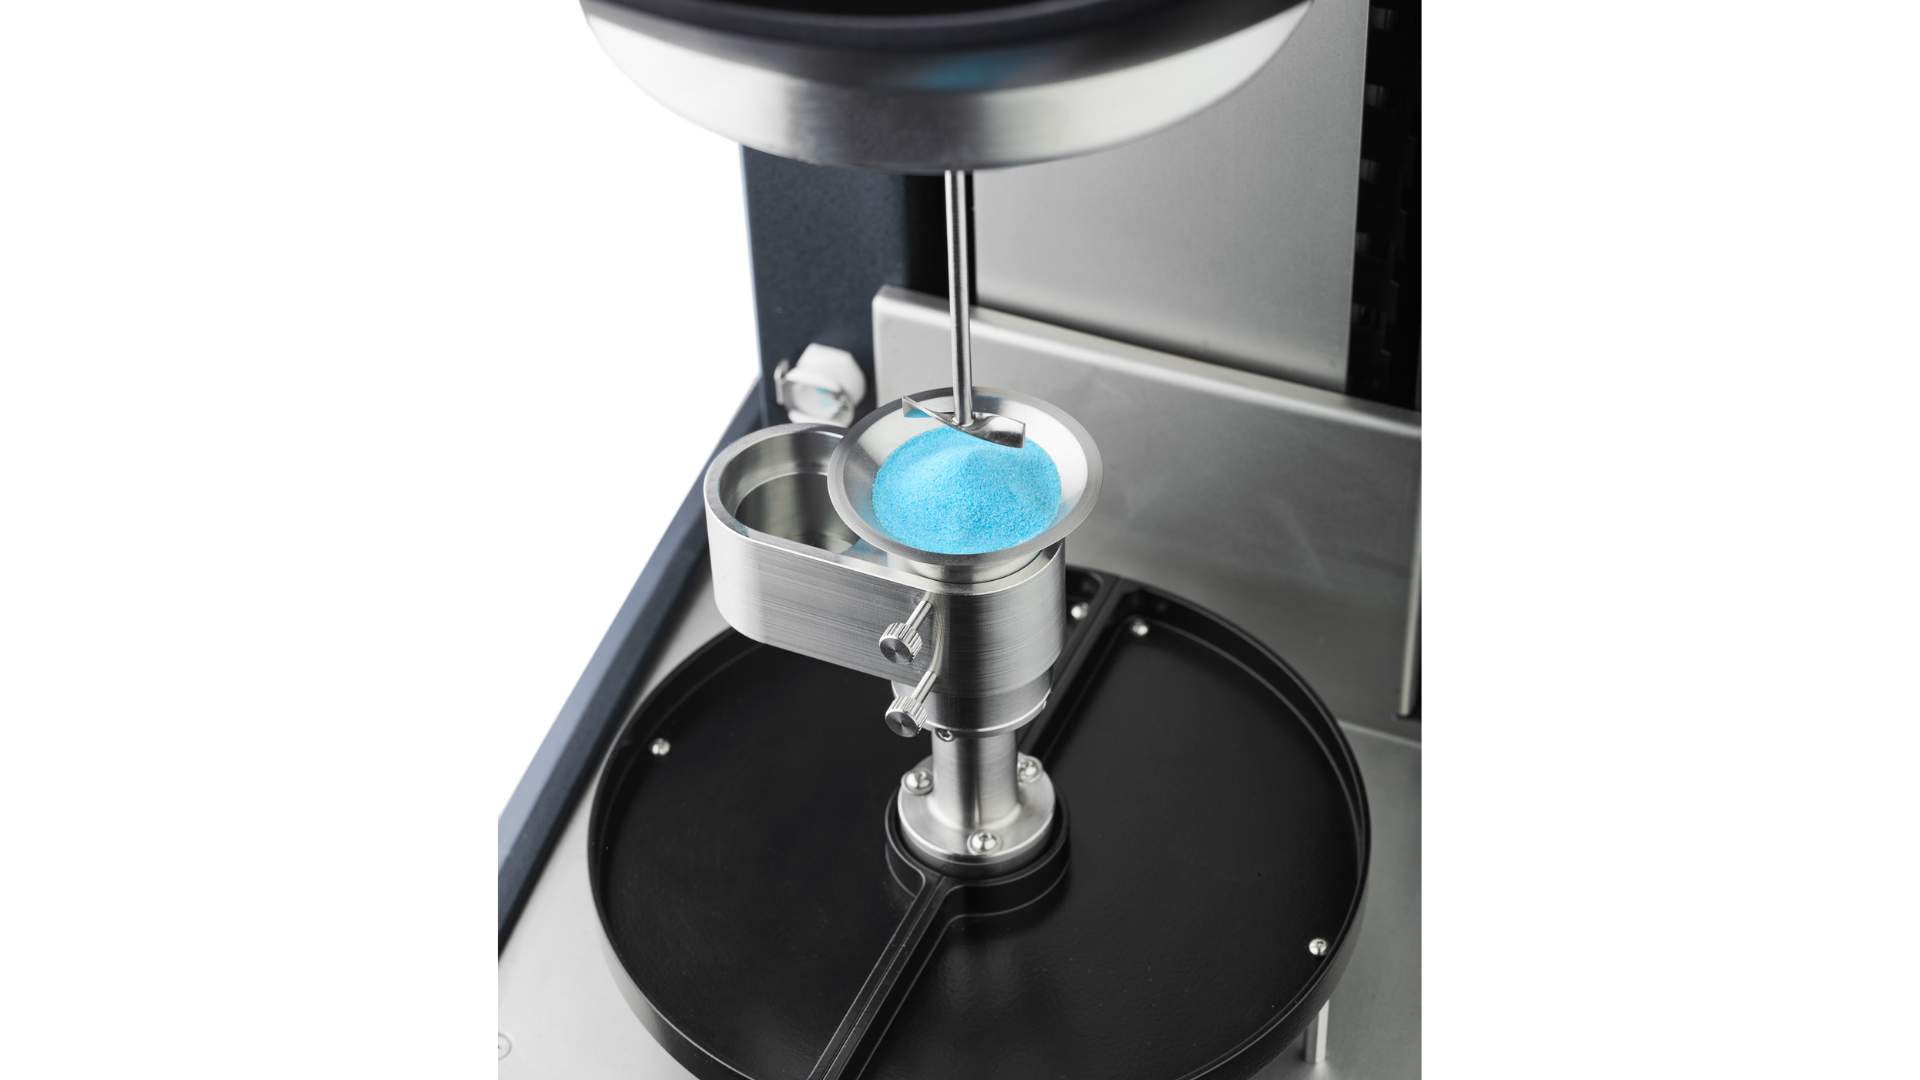 Waters introduced new powder rheology tooling and software allowing scientists to make precise, repeatable powder analysis simpler and faster.